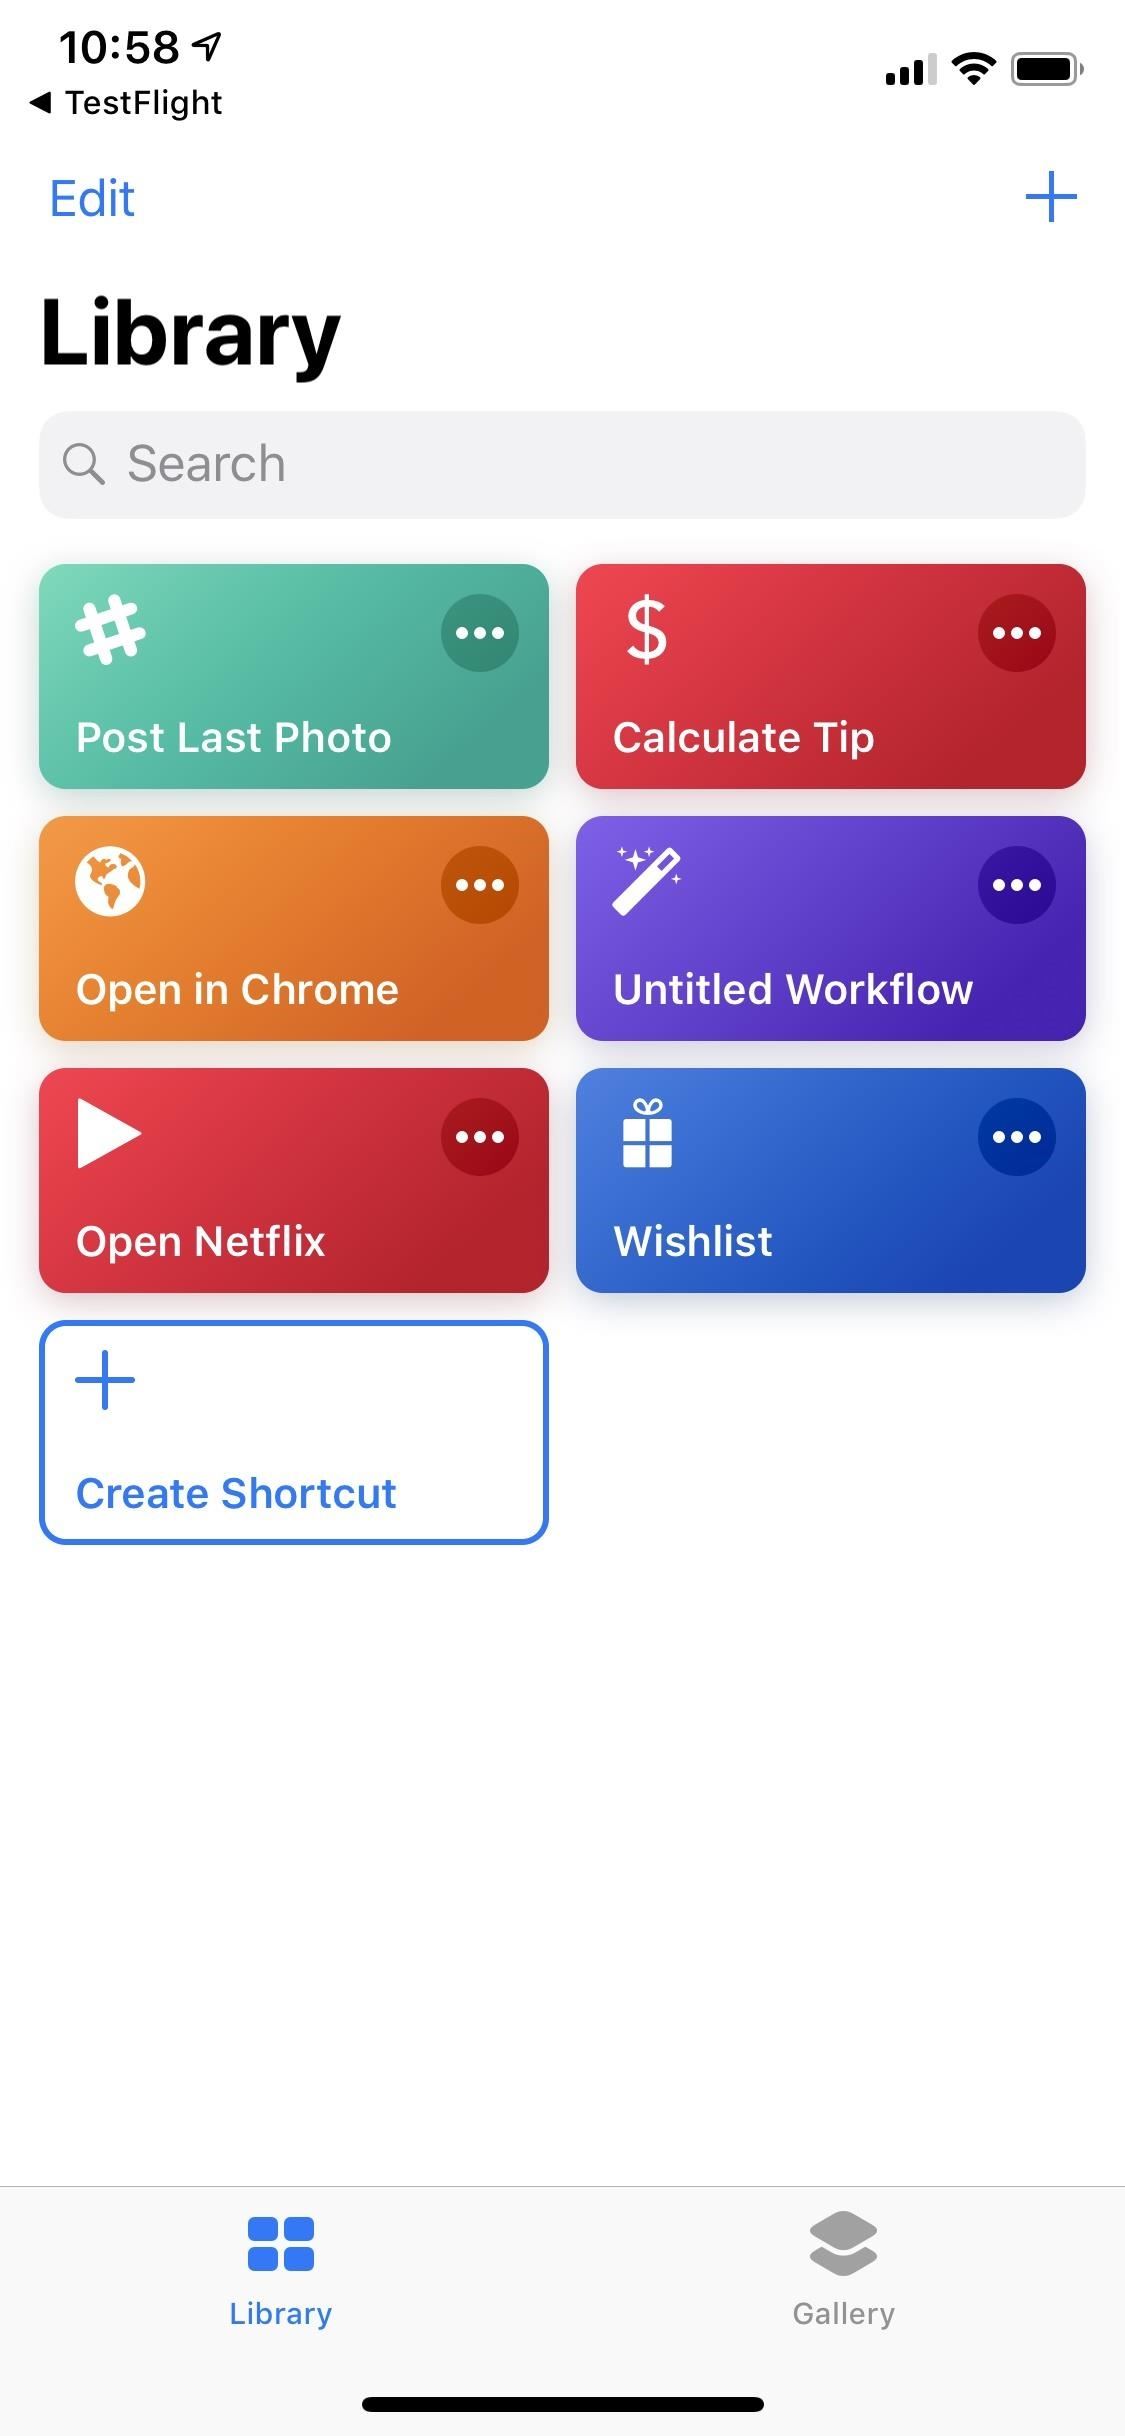 How to Create Your Own Shortcuts in iOS 12 to Get Things Done Faster with Siri